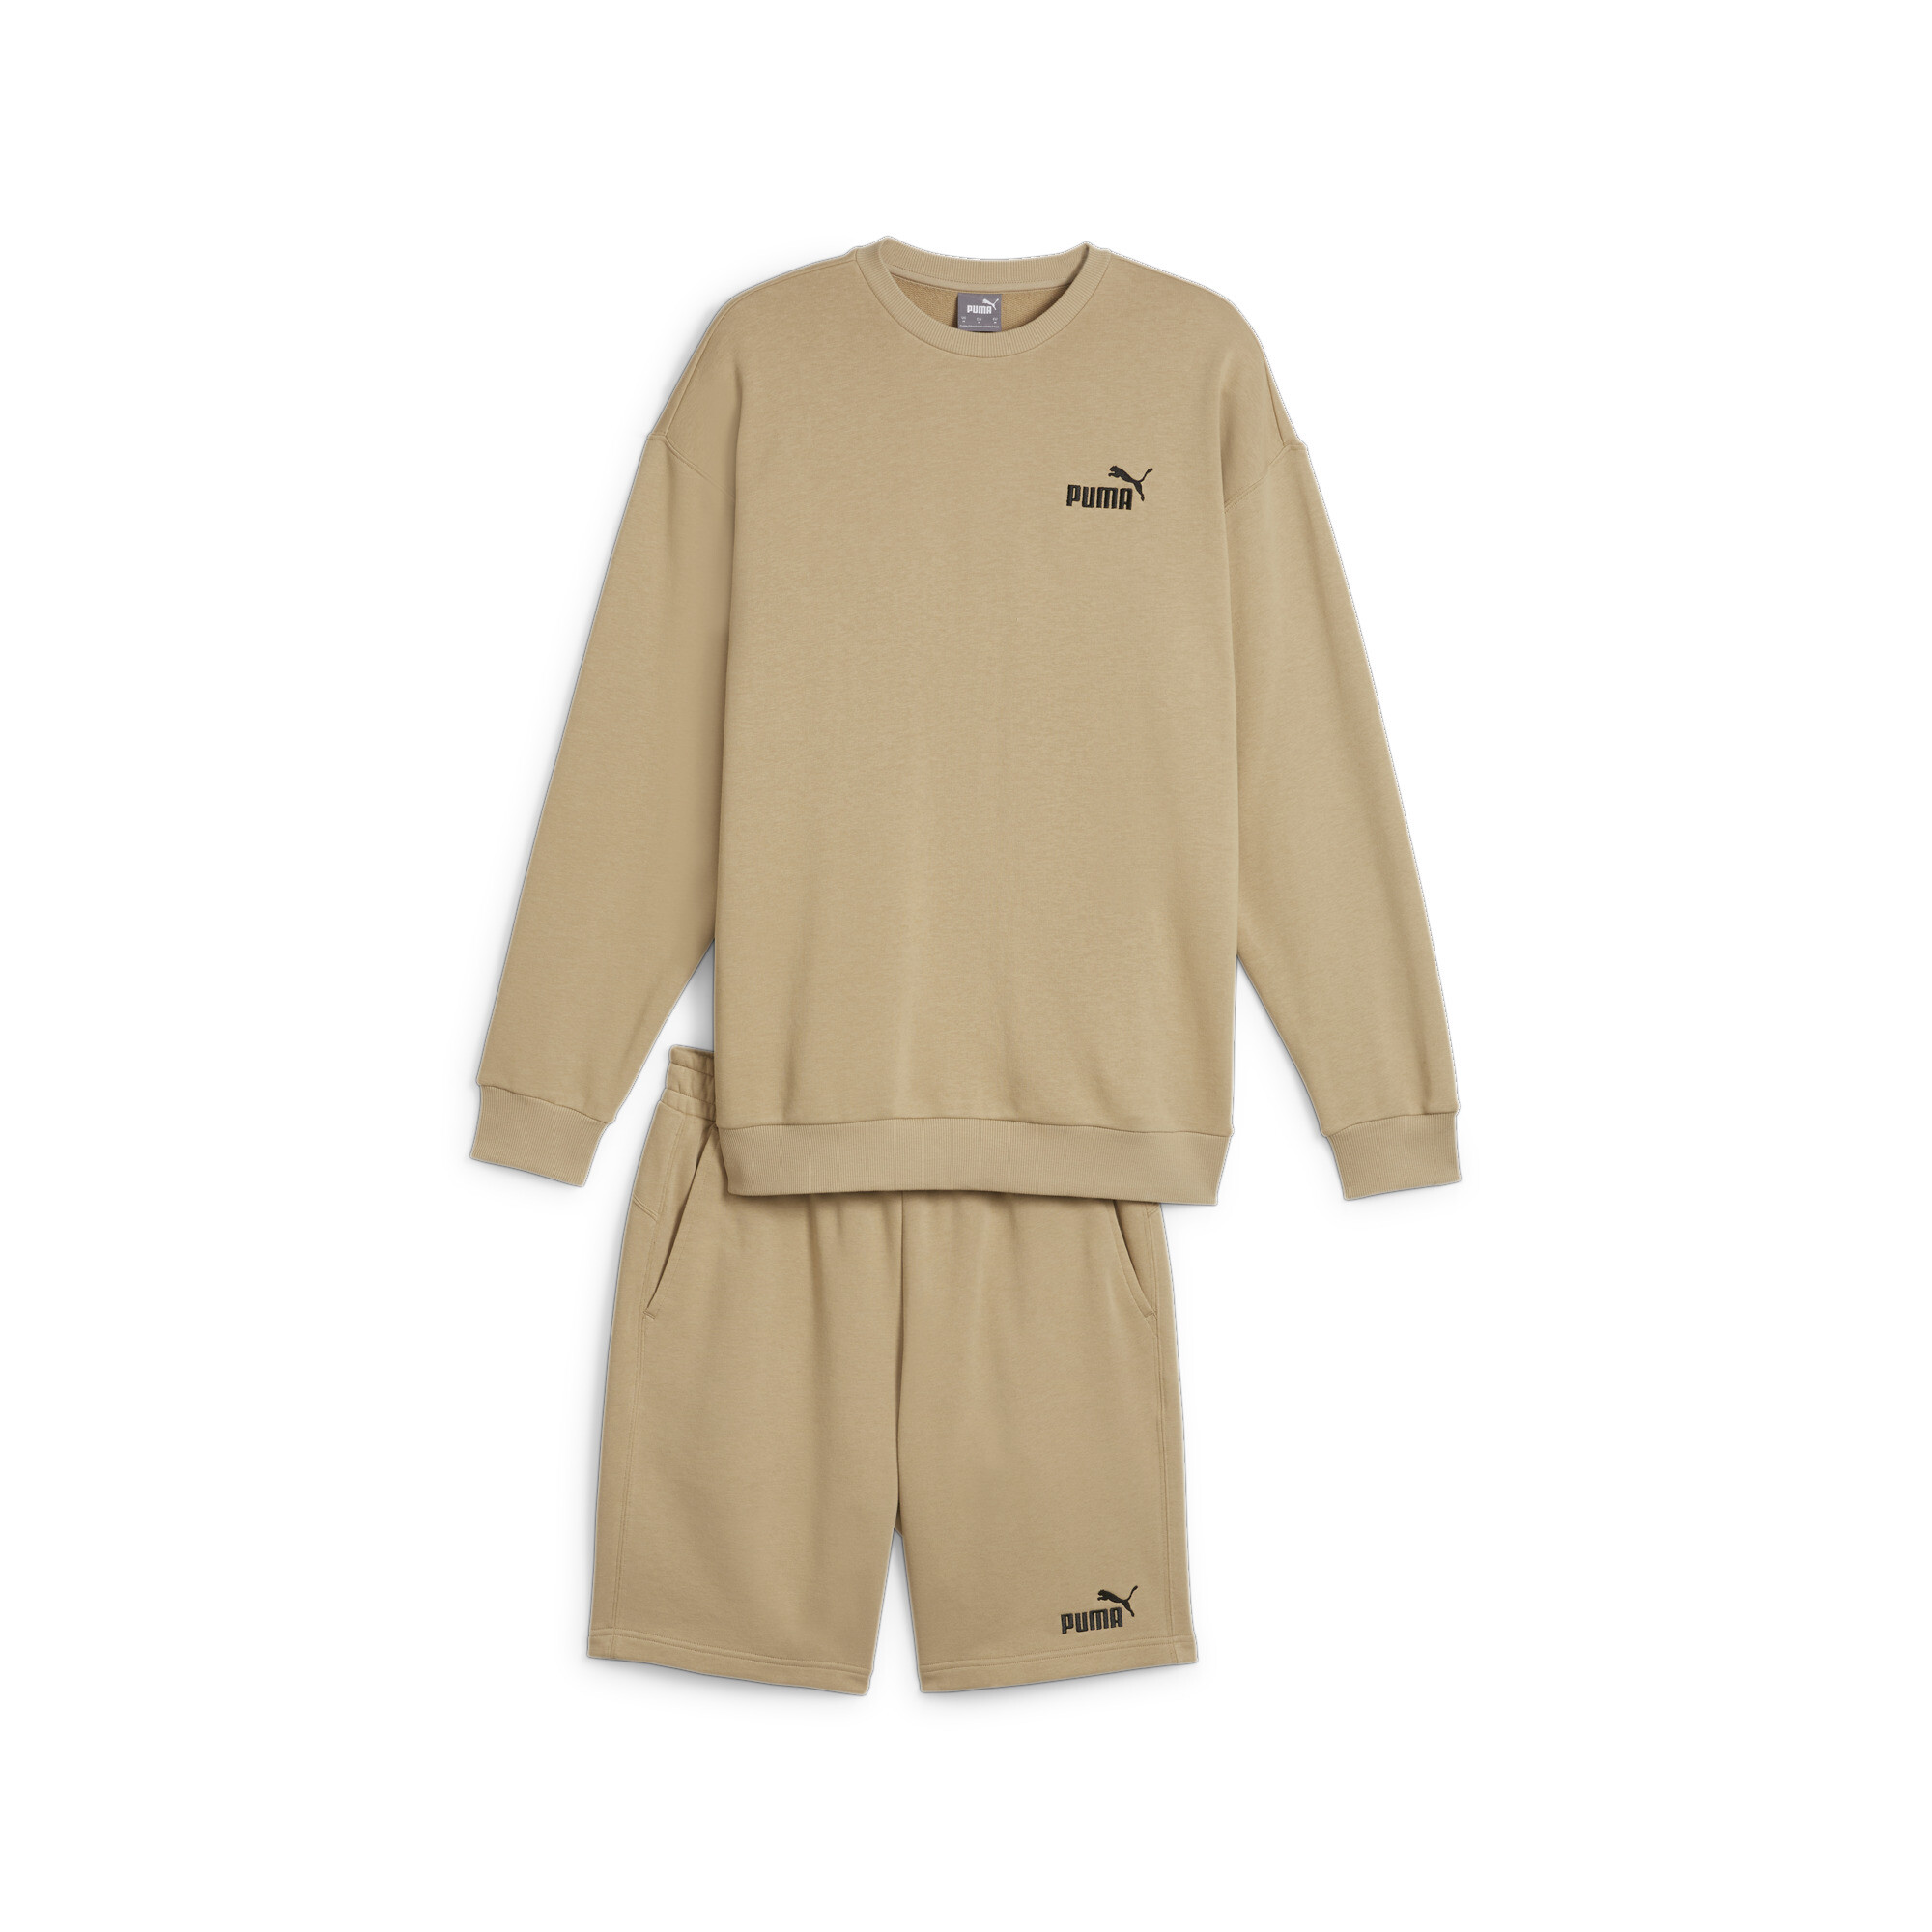 Men's Puma Relaxed Sweatsuit, Beige, Size 3XL, Clothing